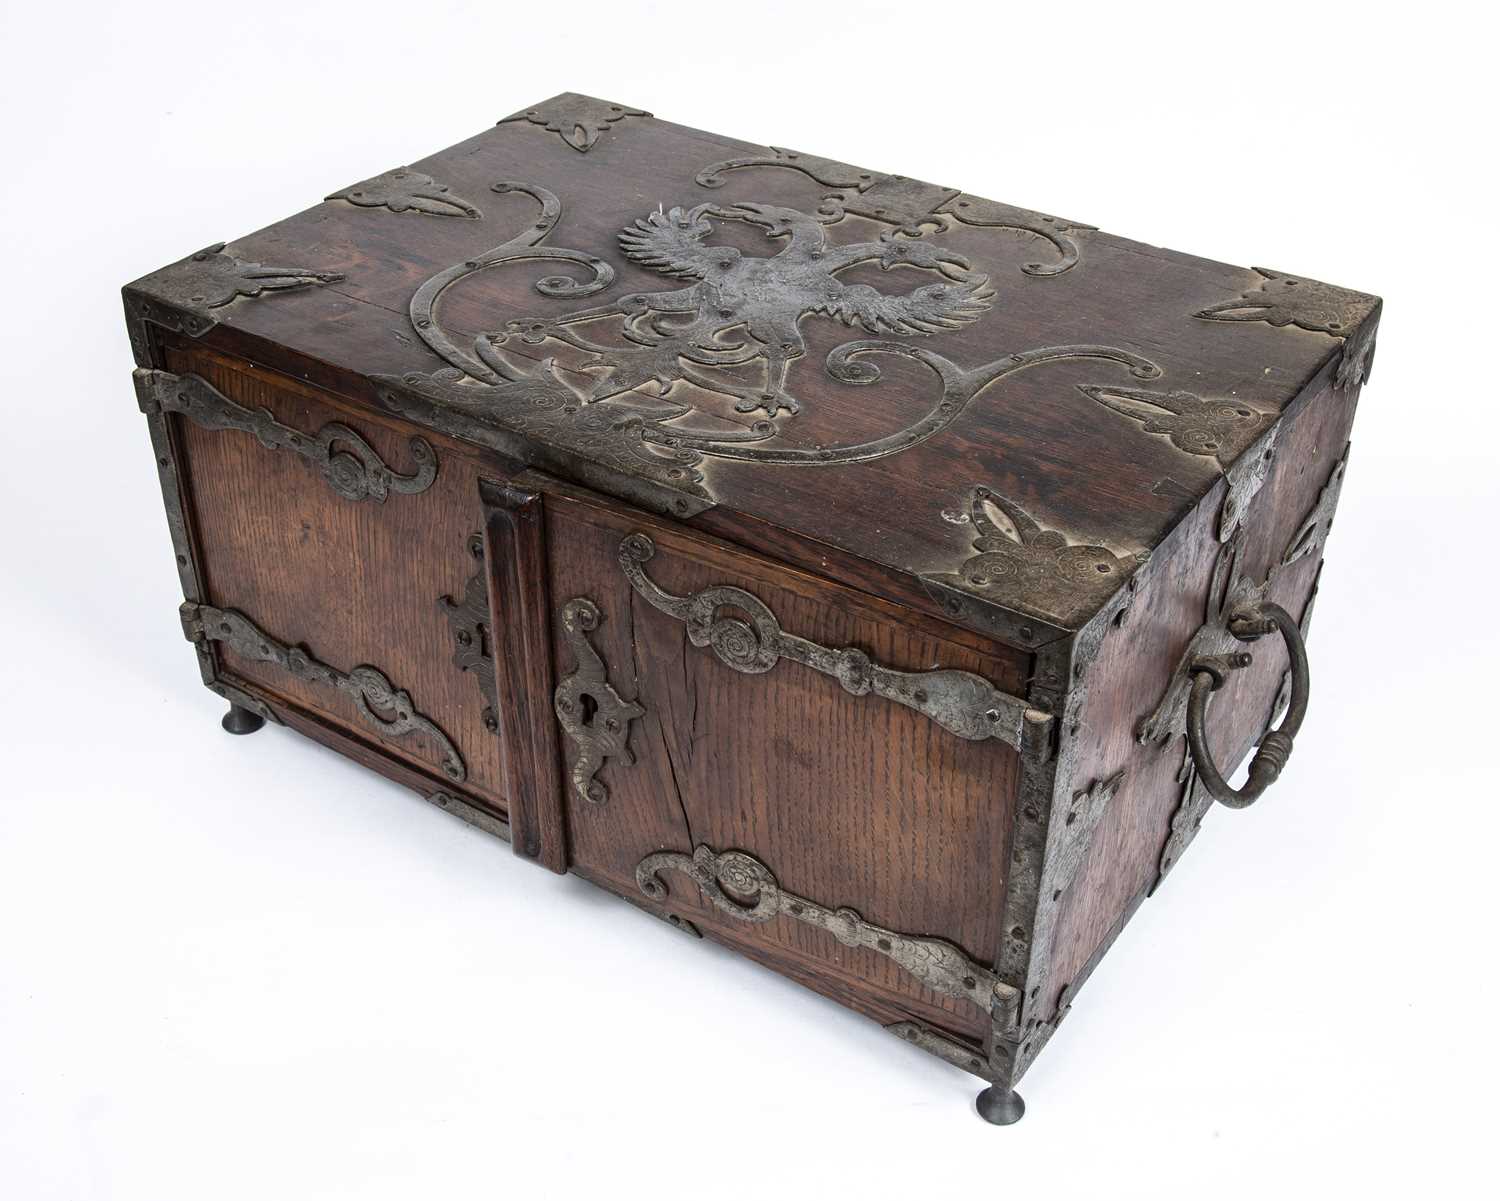 A 17th century German oak and metal bound table top cabinet of drawers, having a double headed eagle - Image 4 of 10